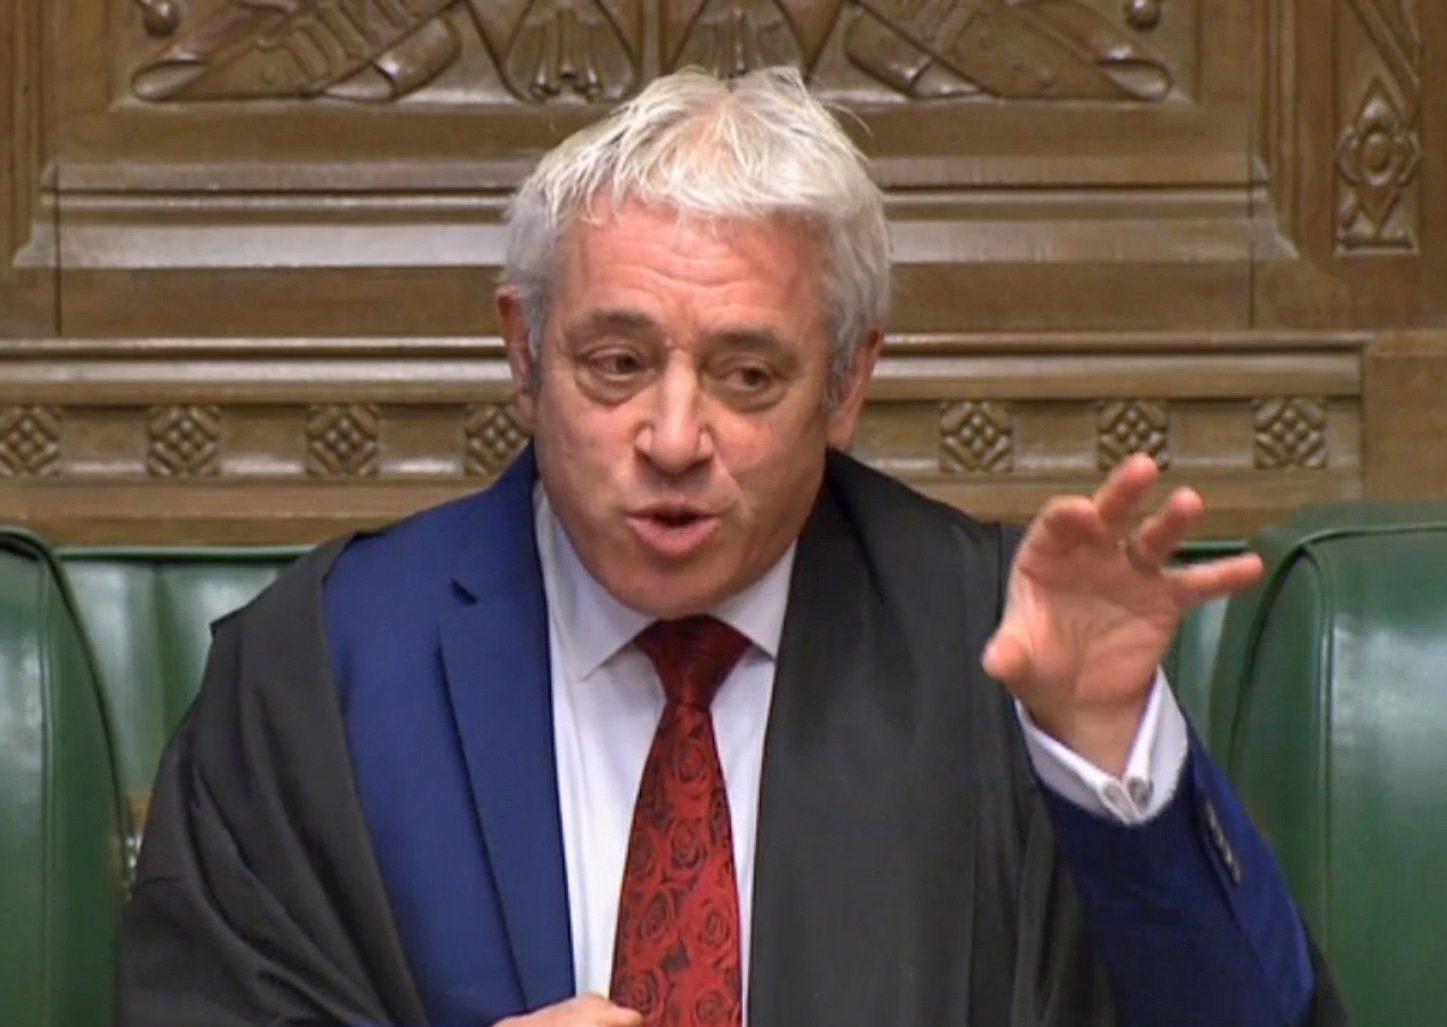 Will John Bercow leave as promised or will he choose to carry on sabotaging the Brexit vote?